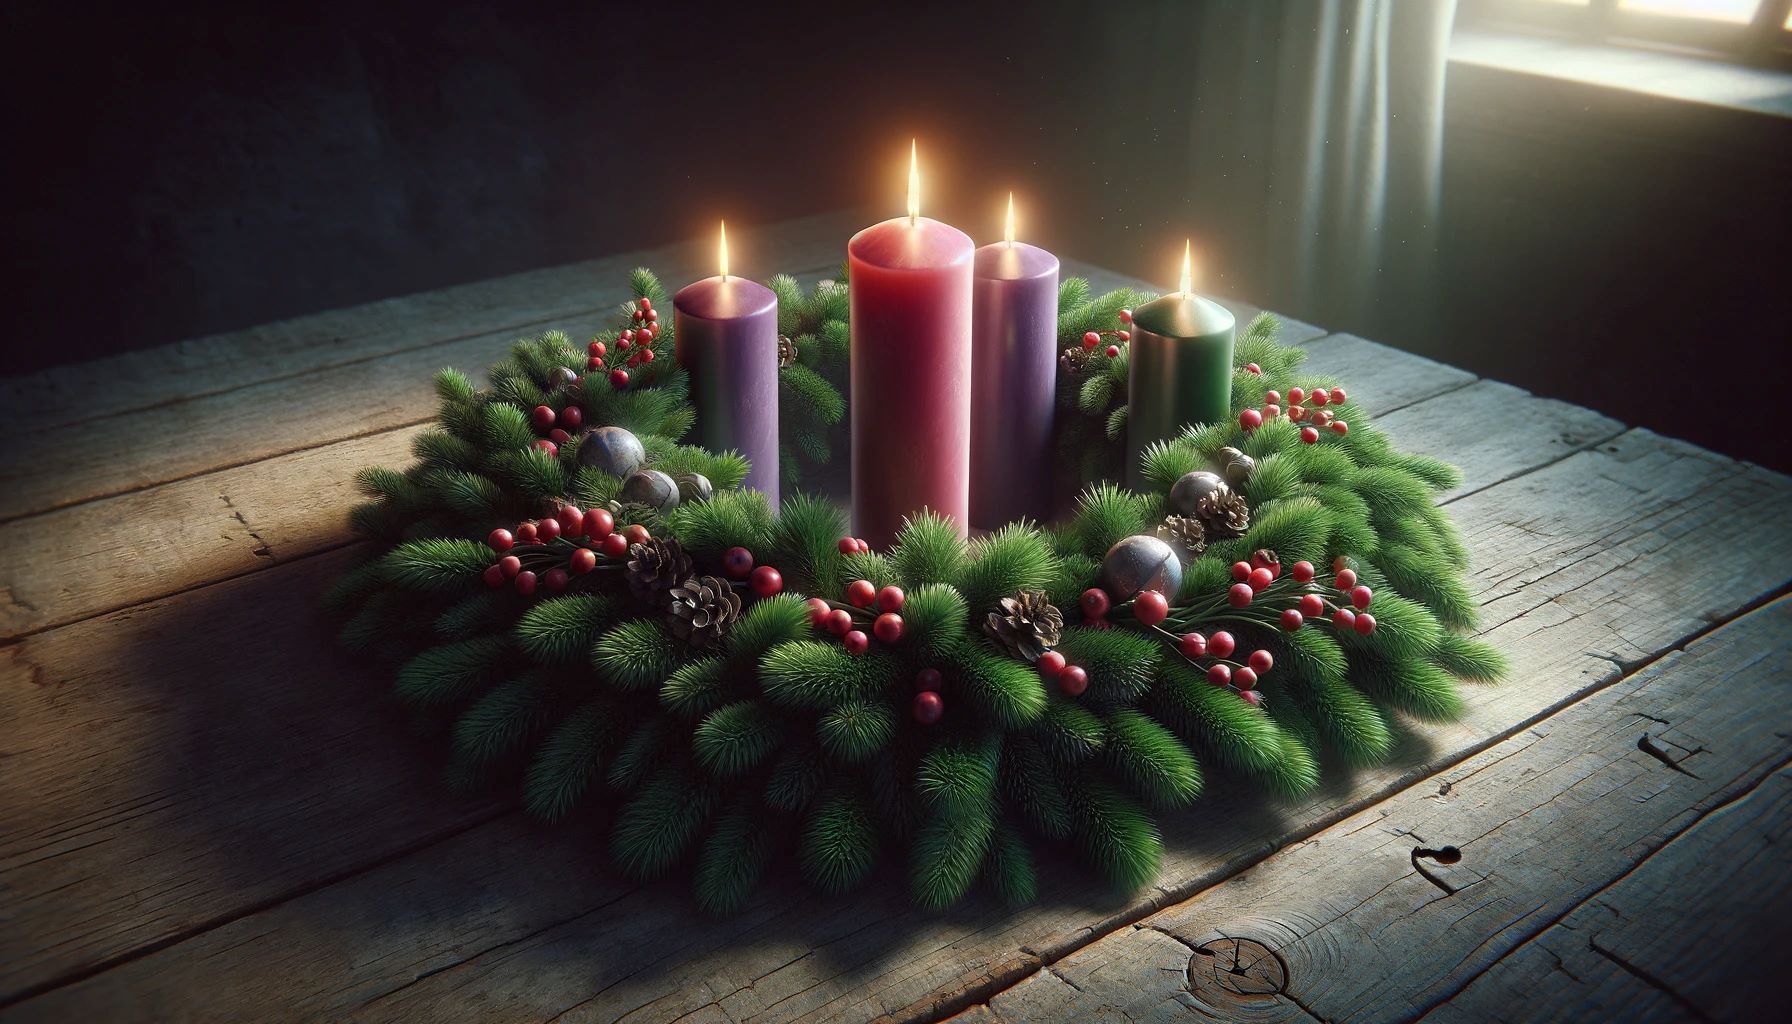 How Many Candles Are There On The Advent Wreath